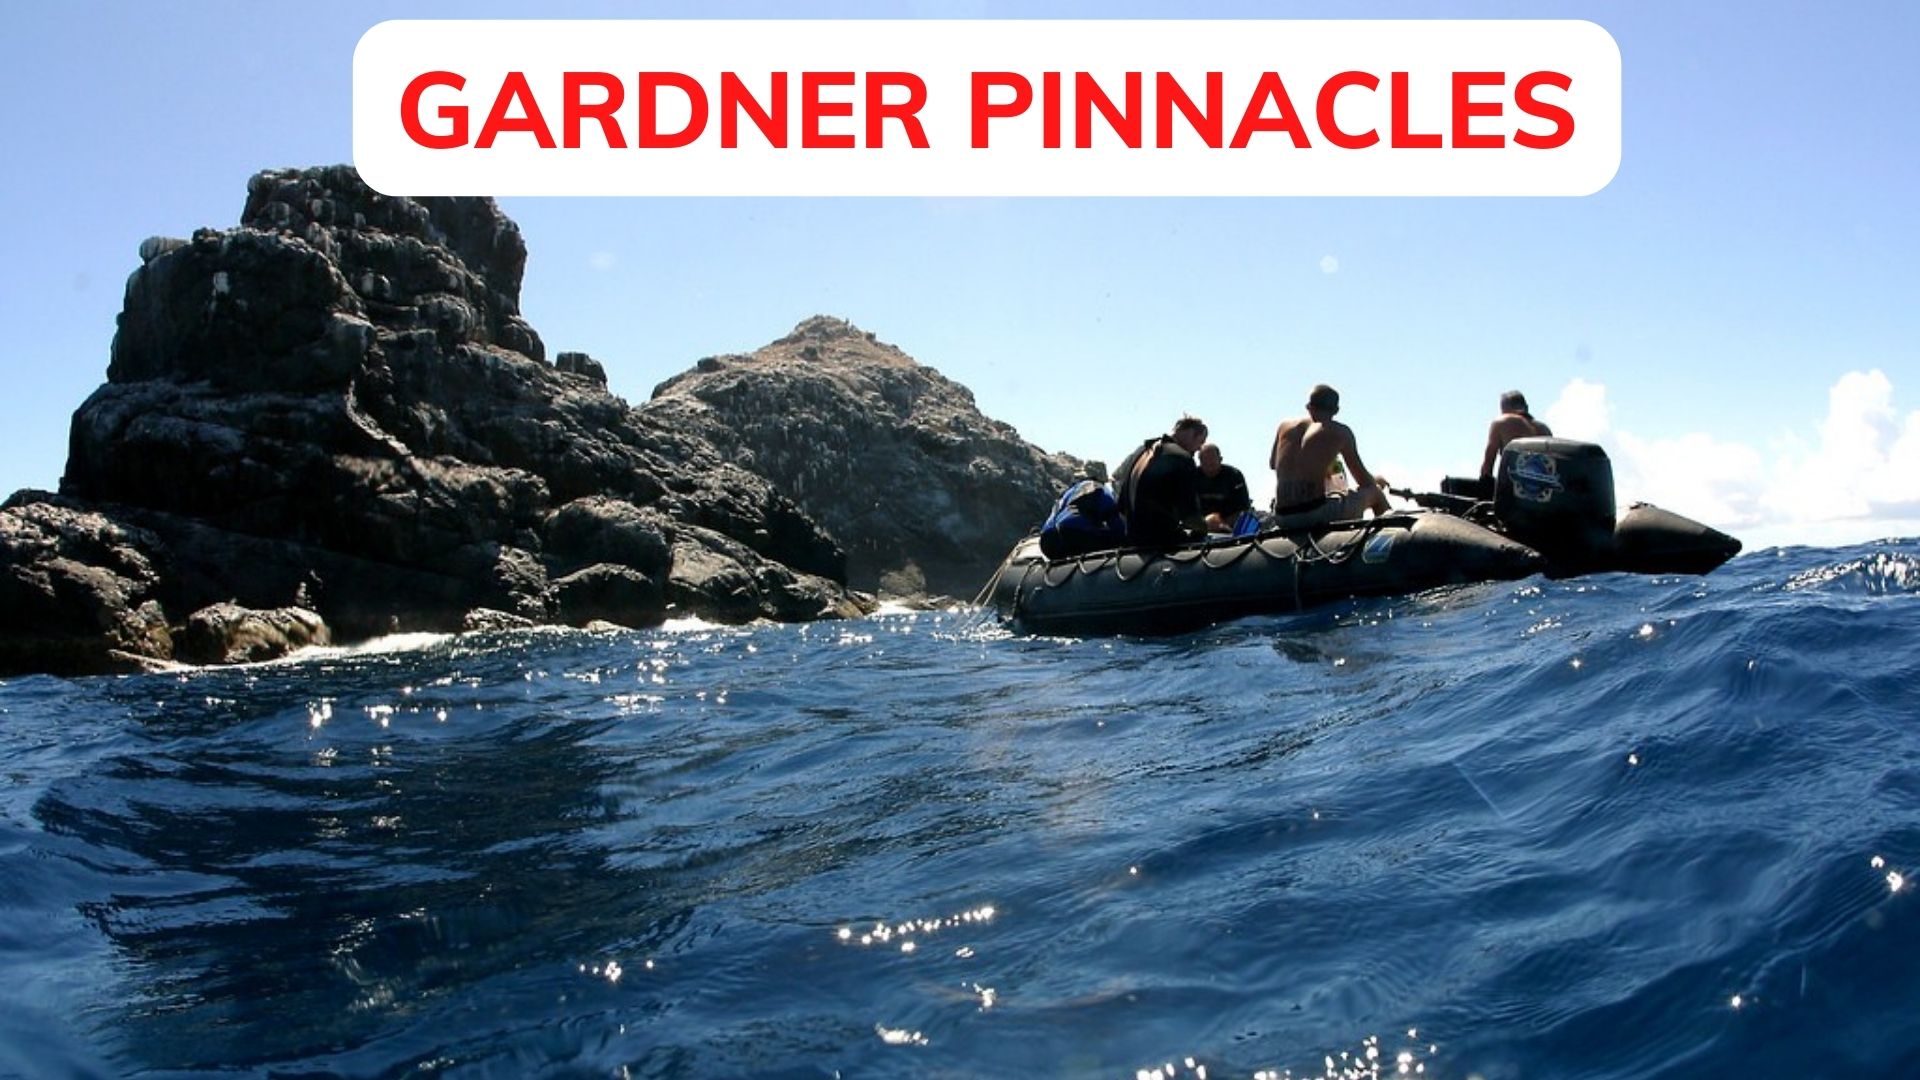 Gardner Pinnacles - Situated Between French Frigate Shoals And Maro Reef